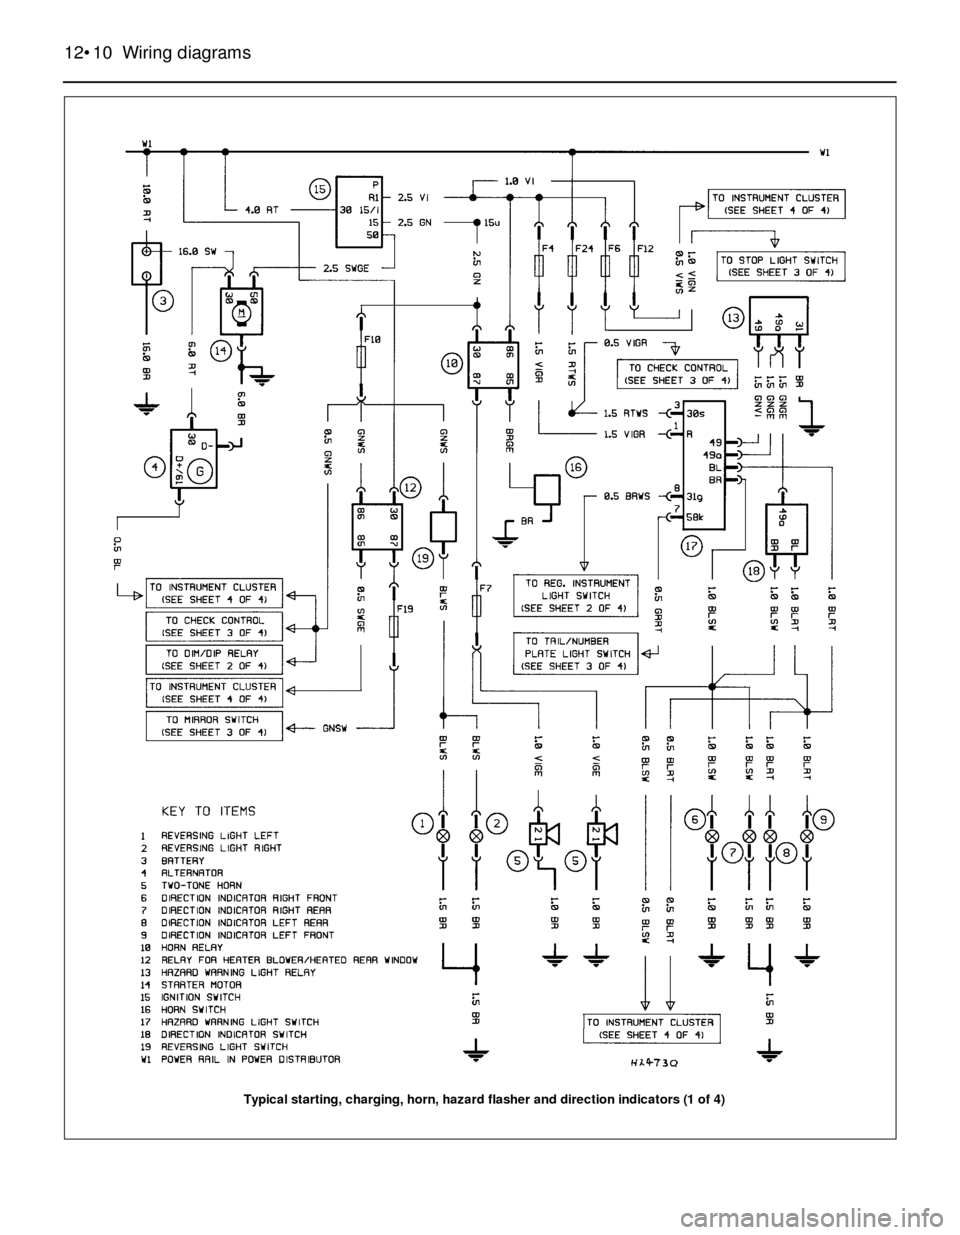 BMW 3 SERIES 1990 E30 Workshop Manual 12•10 Wiring diagrams
Typical starting, charging, horn, hazard flasher and direction indicators (1 of 4) 